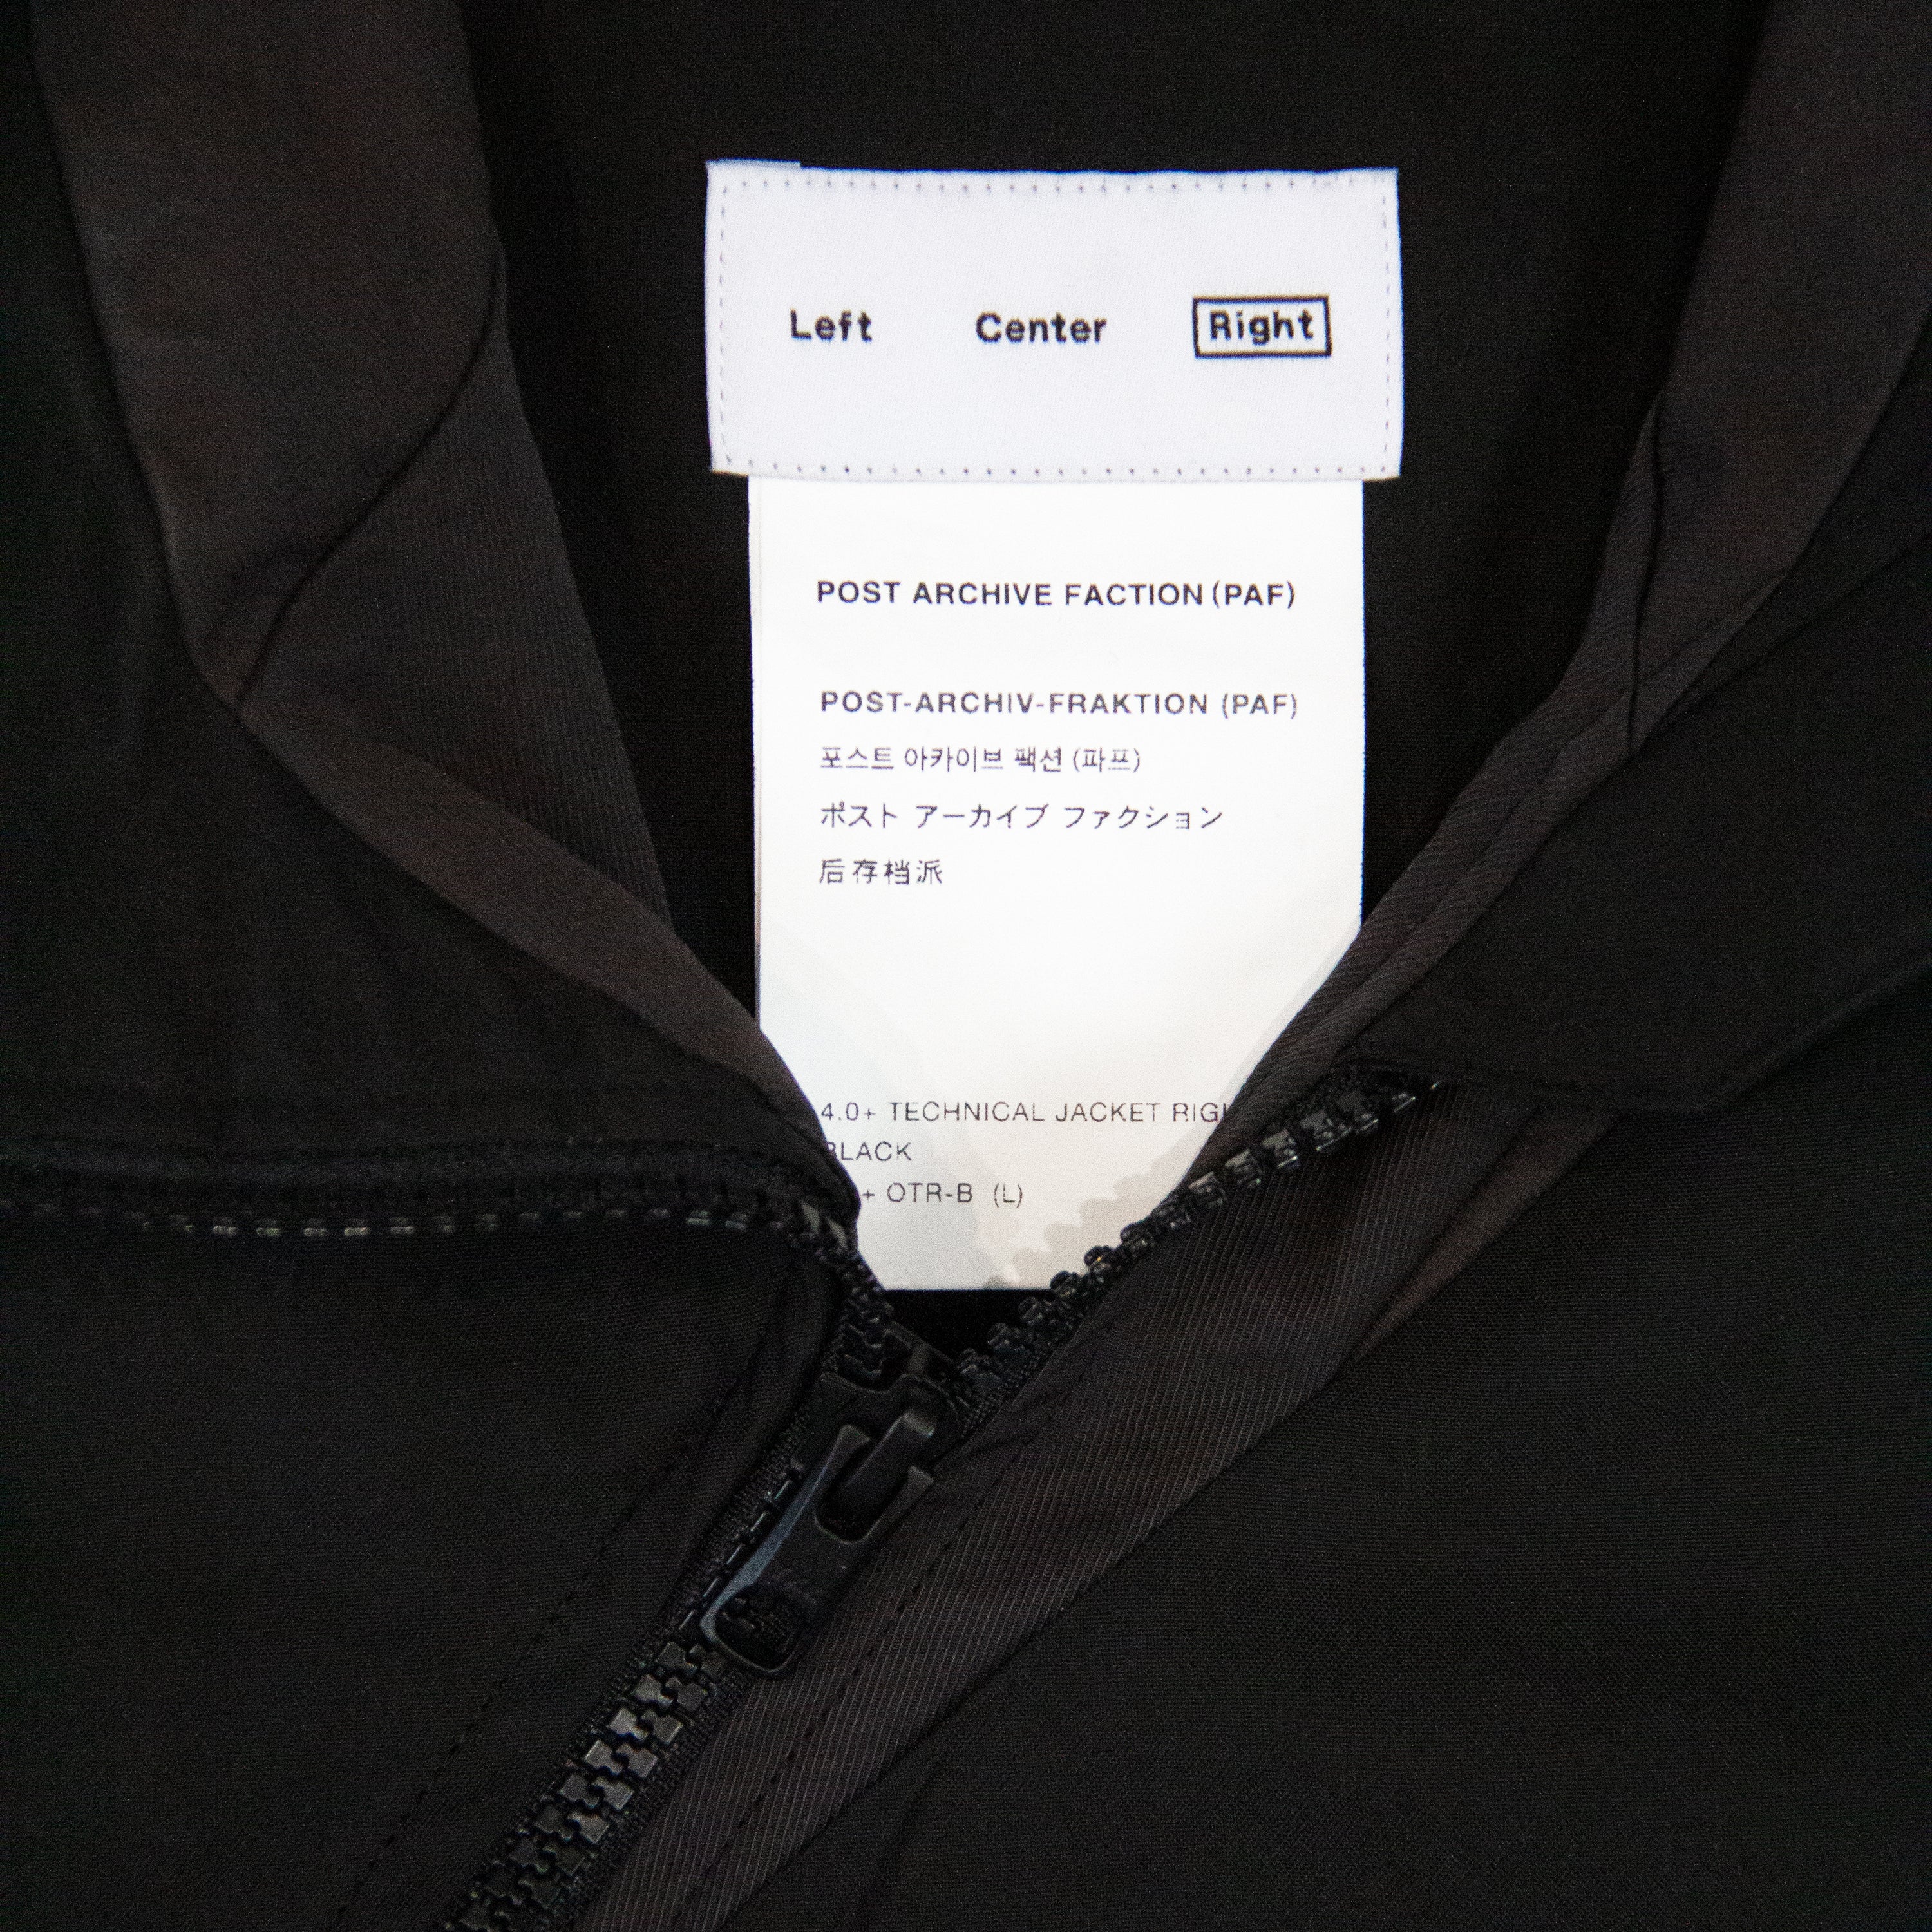 4.0+ TECHNICAL RIGHT JACKET – OBTAIND